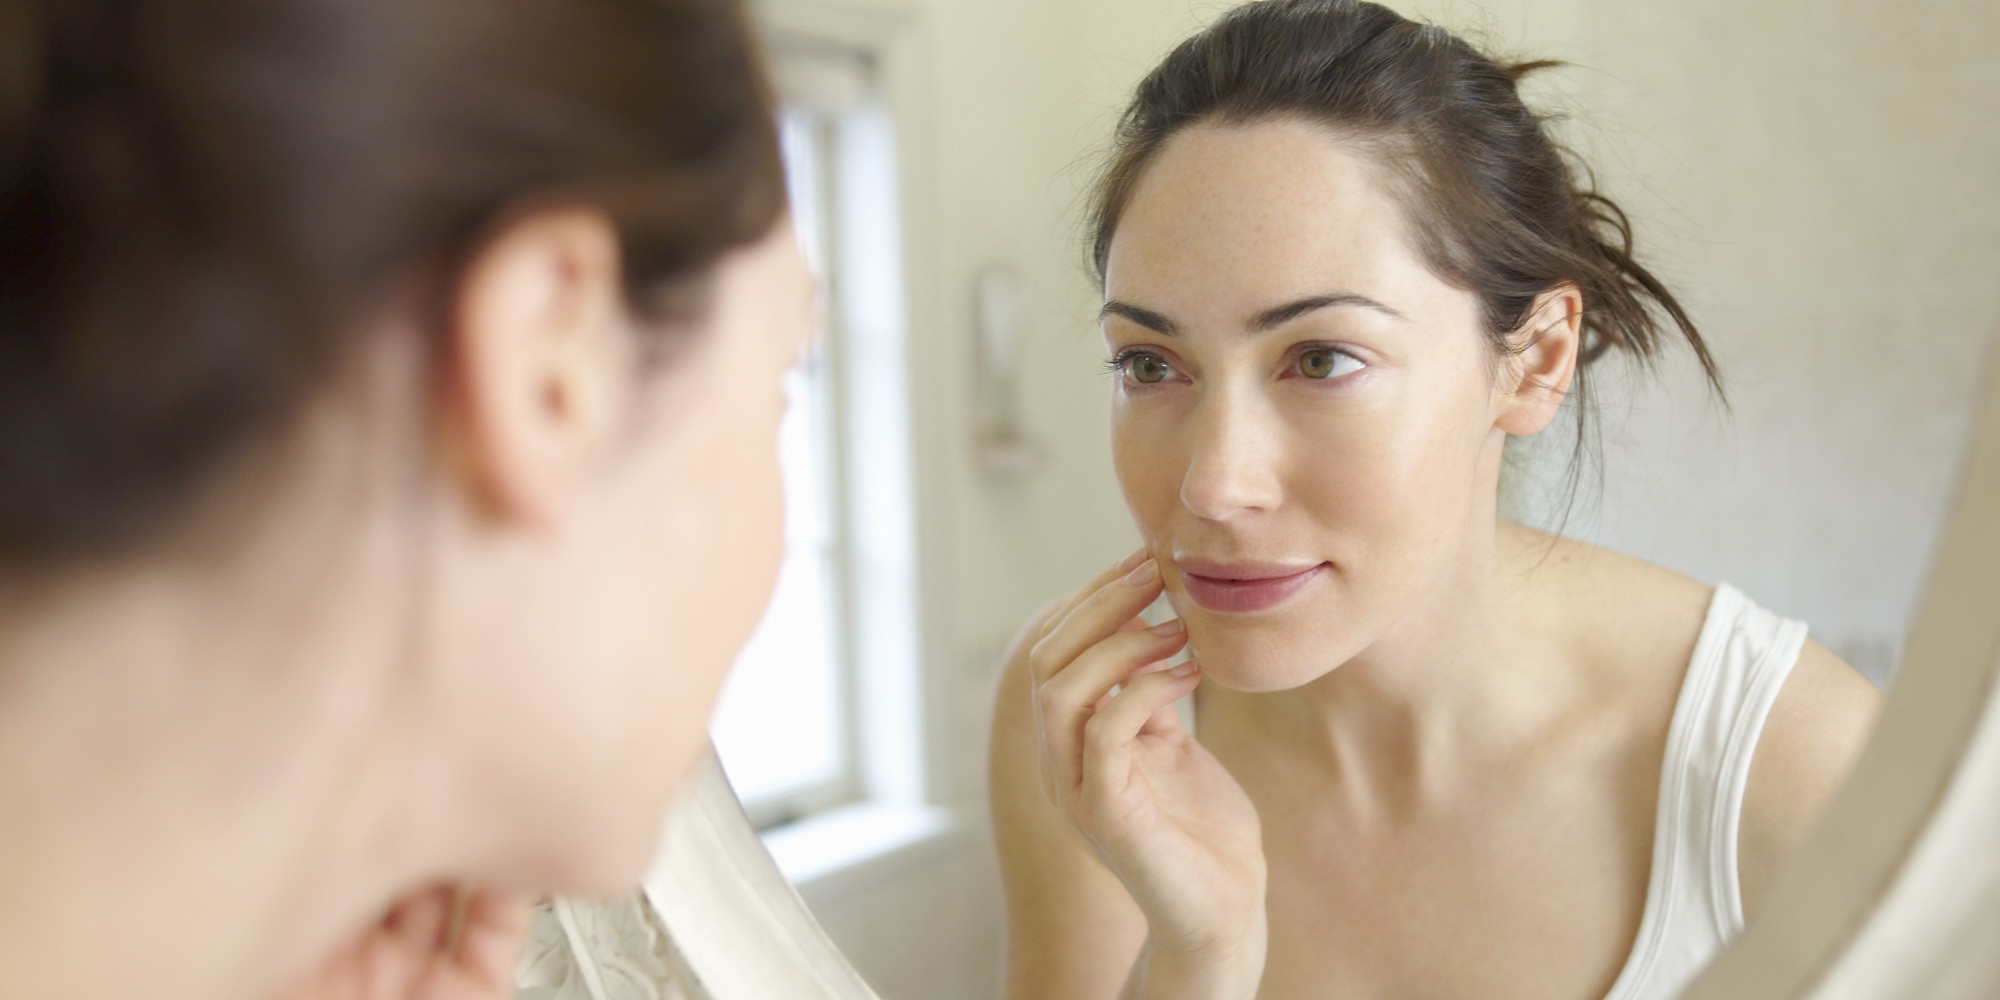 What To Remember The Next Time You Look In The Mirror | HuffPost